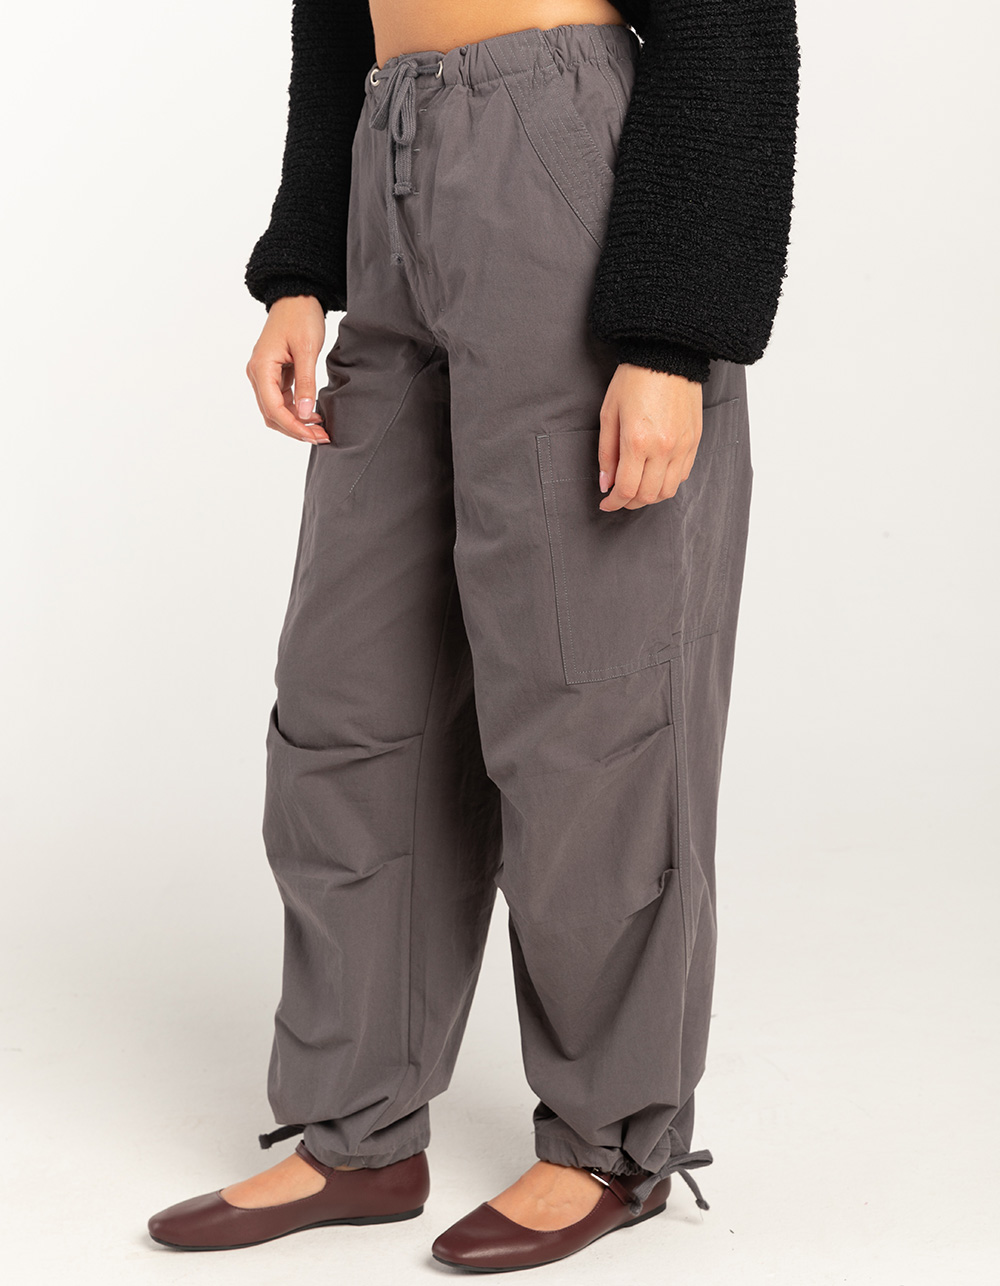 RSQ Womens Low Rise Ripstop Cargo Pants - TAUPE